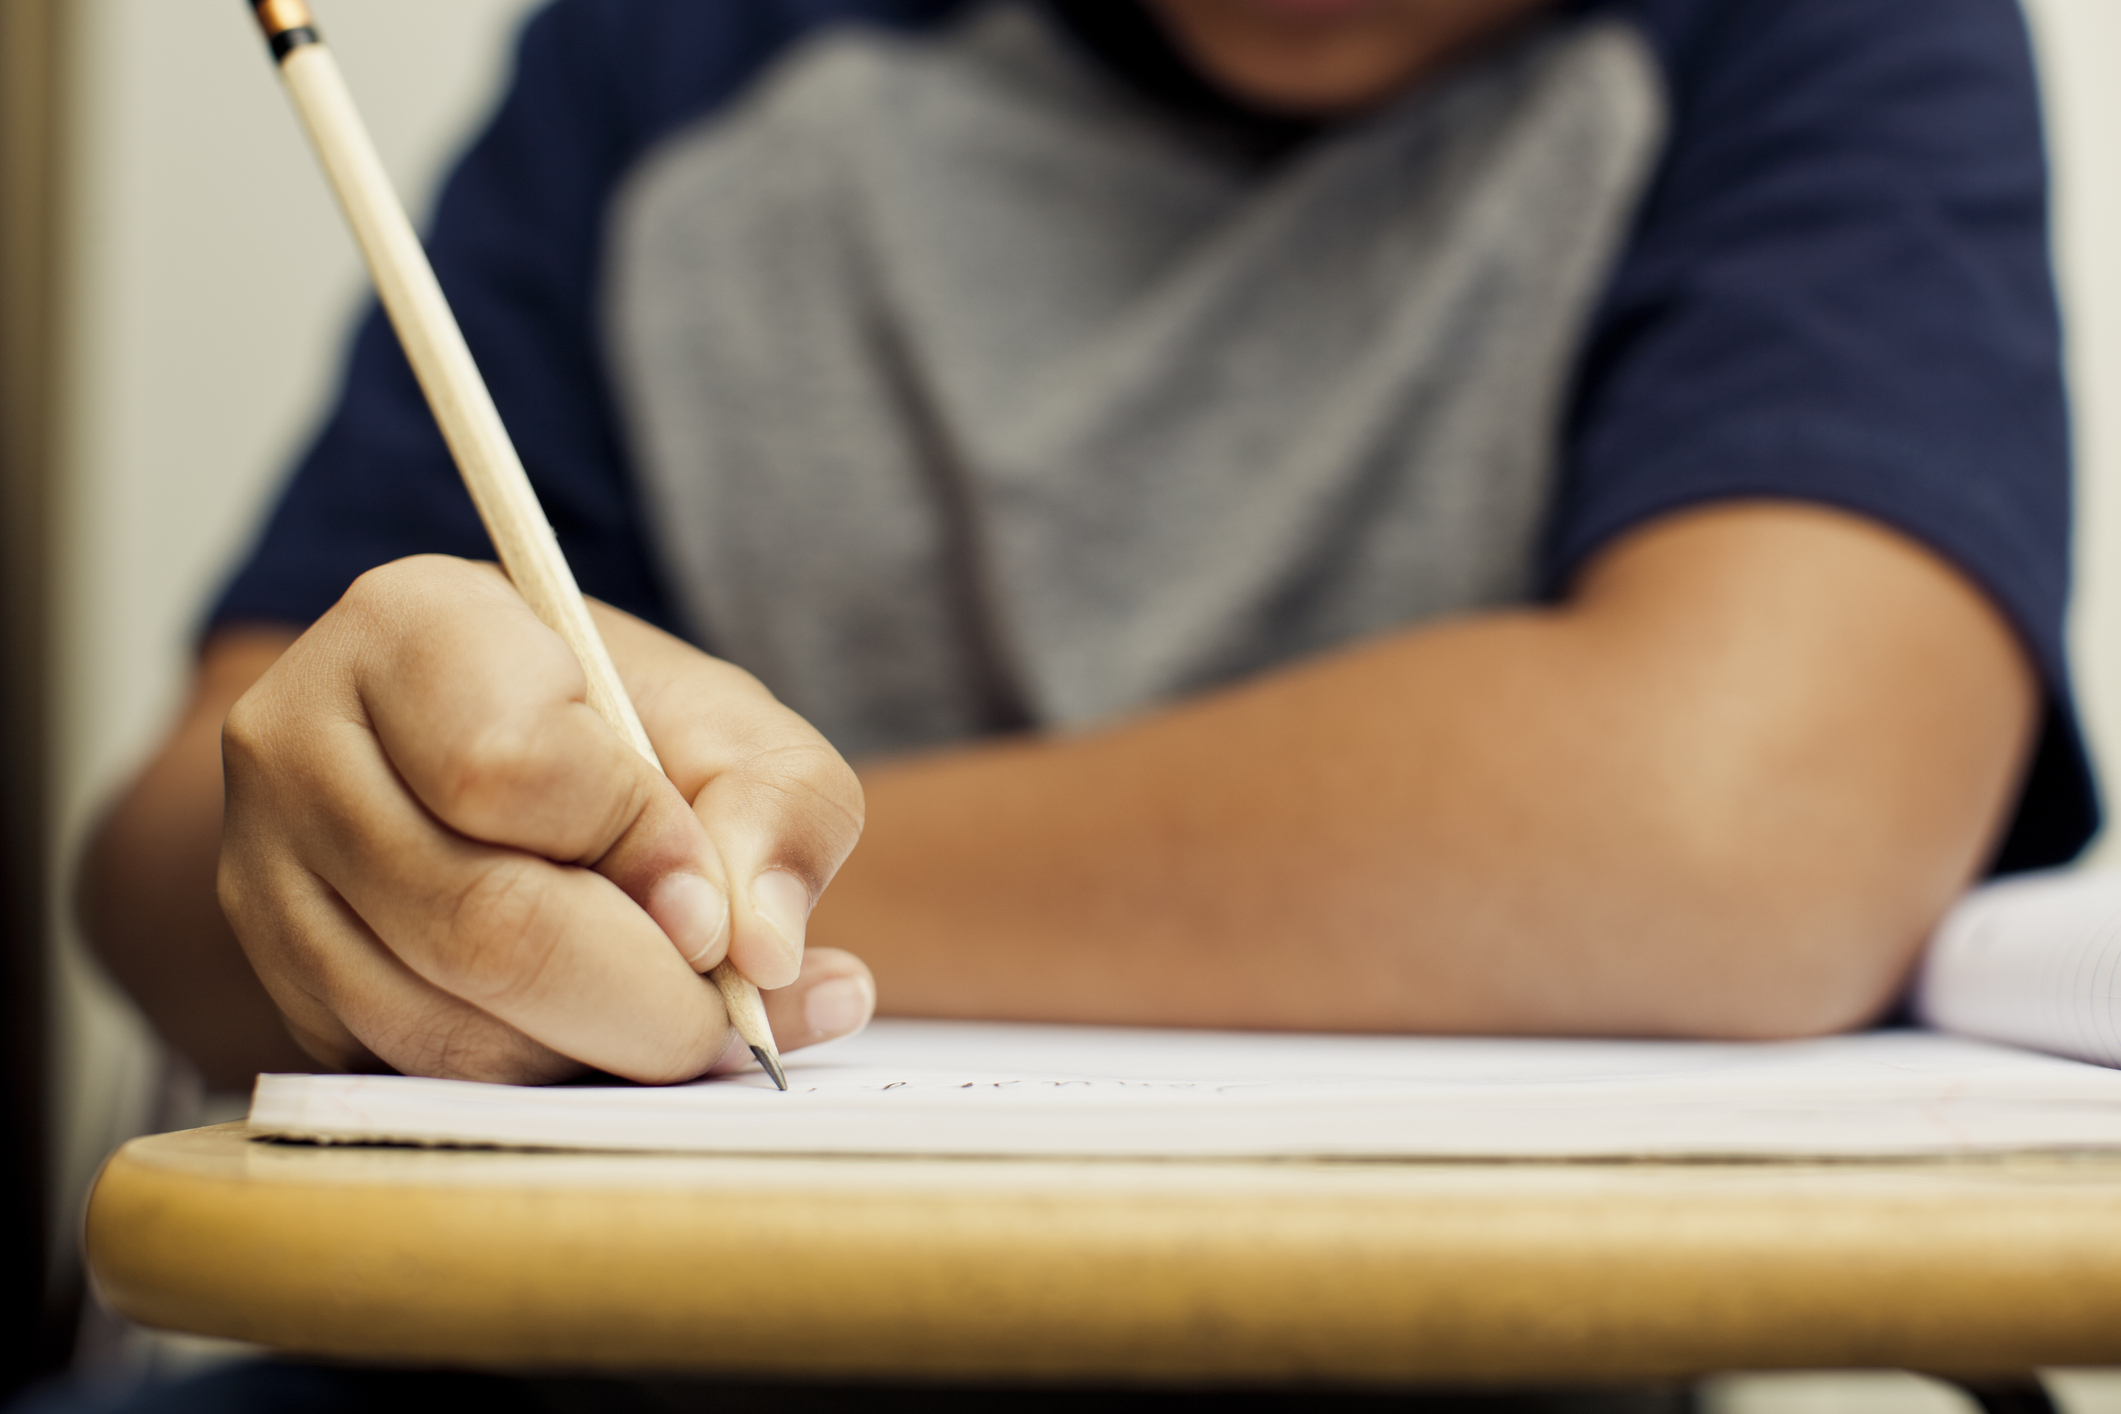 Student holds a pencil to a notebook placed on a desk.